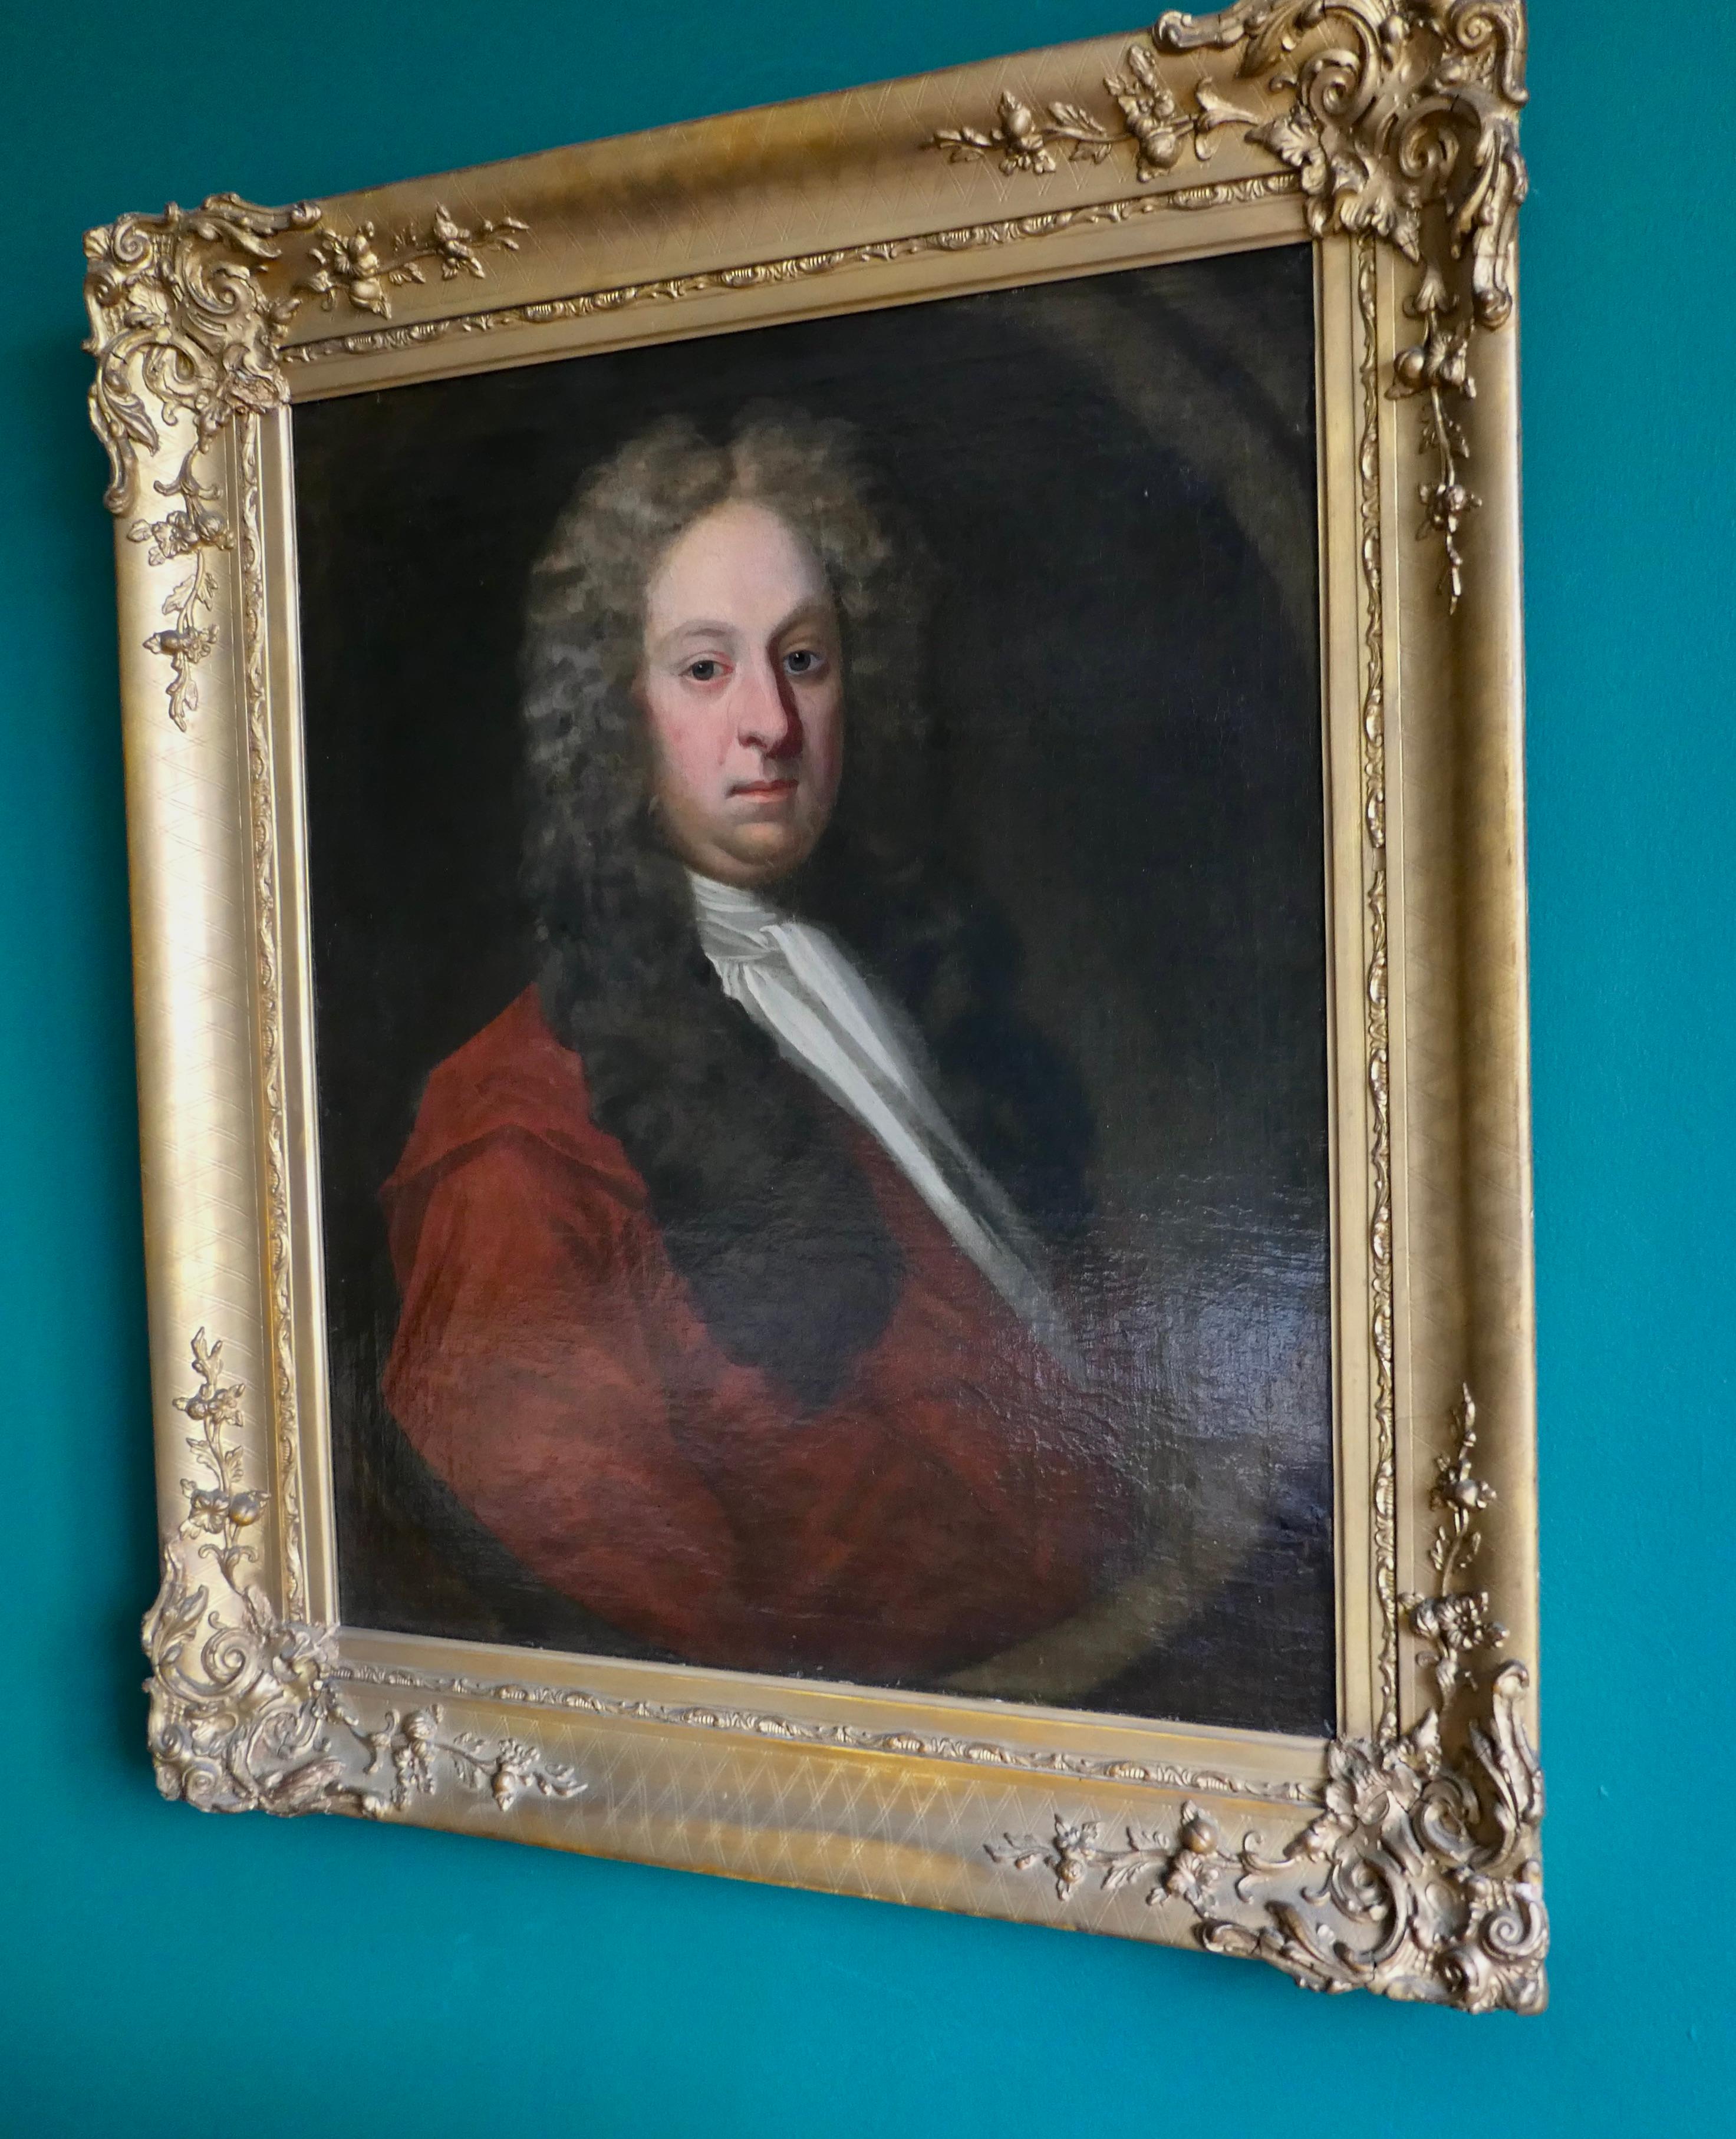 Early 18th century portrait of a gentleman, William Woodhouse of Rearsby Hall.

Superbly painted, oil on canvas in nice condition, the portrait shows a gentleman in a large wig with his head turned slightly to the right, and he is wearing a white